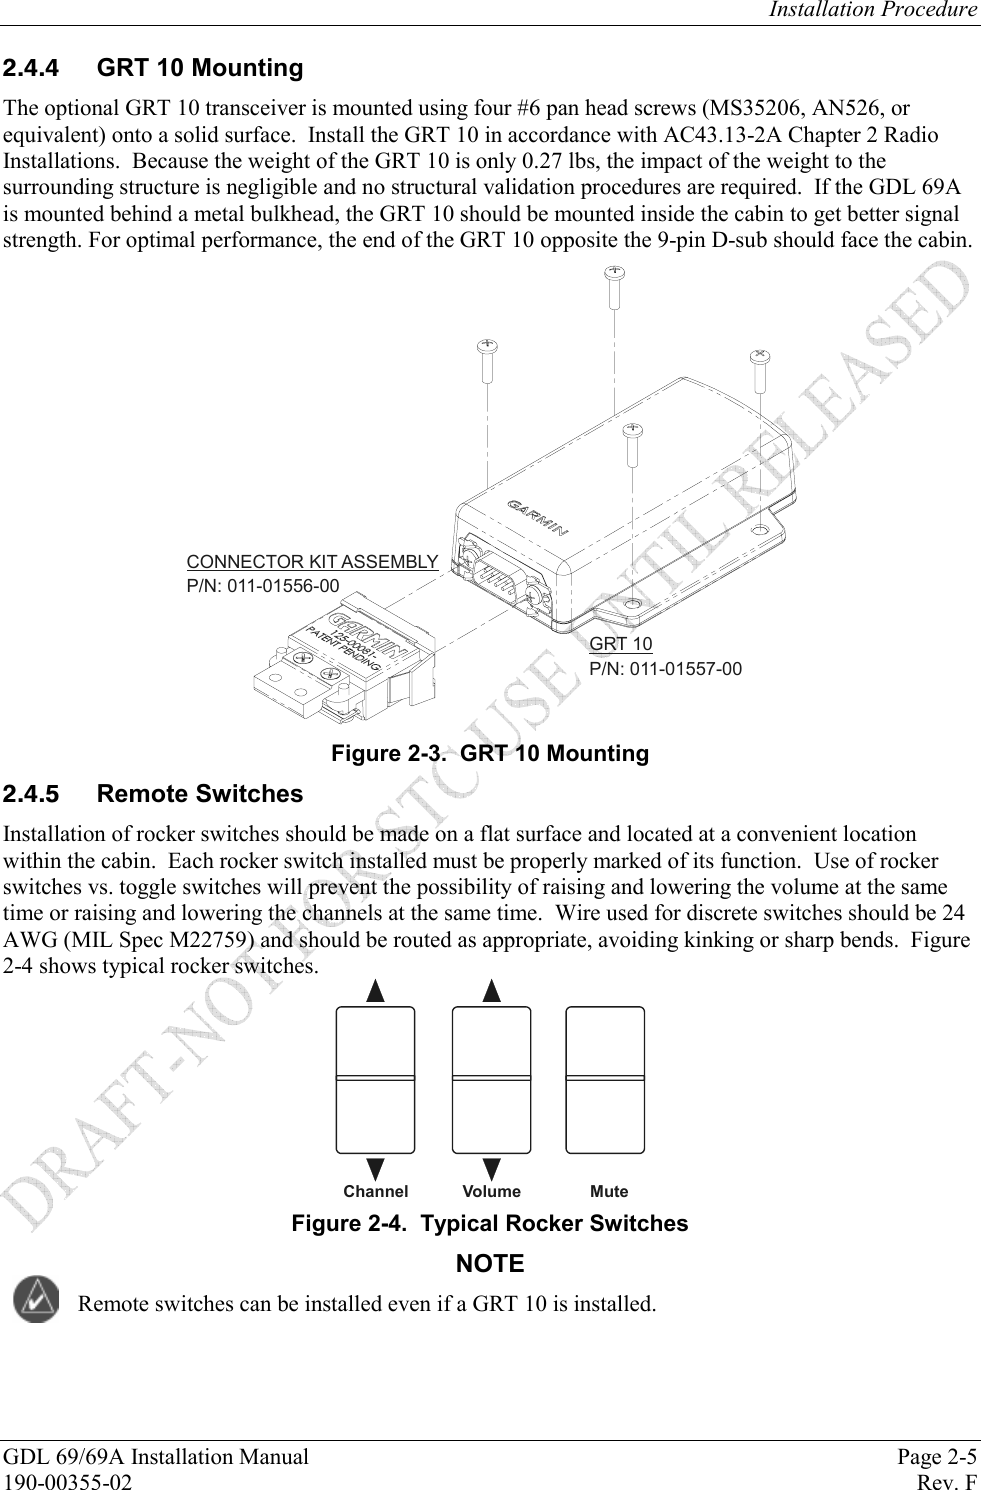 Installation Procedure GDL 69/69A Installation Manual  Page 2-5 190-00355-02   Rev. F   GRT 10 Mounting The optional GRT 10 transceiver is mounted using four #6 pan head screws (MS35206, AN526, or equivalent) onto a solid surface.  Install the GRT 10 in accordance with AC43.13-2A Chapter 2 Radio Installations.  Because the weight of the GRT 10 is only 0.27 lbs, the impact of the weight to the surrounding structure is negligible and no structural validation procedures are required.  If the GDL 69A is mounted behind a metal bulkhead, the GRT 10 should be mounted inside the cabin to get better signal strength. For optimal performance, the end of the GRT 10 opposite the 9-pin D-sub should face the cabin. CONNECTOR KIT ASSEMBLYP/N: 011-01556-00GRT 10P/N: 011-01557-00 Figure 2-3.  GRT 10 Mounting  Remote Switches Installation of rocker switches should be made on a flat surface and located at a convenient location within the cabin.  Each rocker switch installed must be properly marked of its function.  Use of rocker switches vs. toggle switches will prevent the possibility of raising and lowering the volume at the same time or raising and lowering the channels at the same time.  Wire used for discrete switches should be 24 AWG (MIL Spec M22759) and should be routed as appropriate, avoiding kinking or sharp bends.  Figure 2-4 shows typical rocker switches.   ChannelVolume Mute Figure 2-4.  Typical Rocker Switches NOTE Remote switches can be installed even if a GRT 10 is installed. 